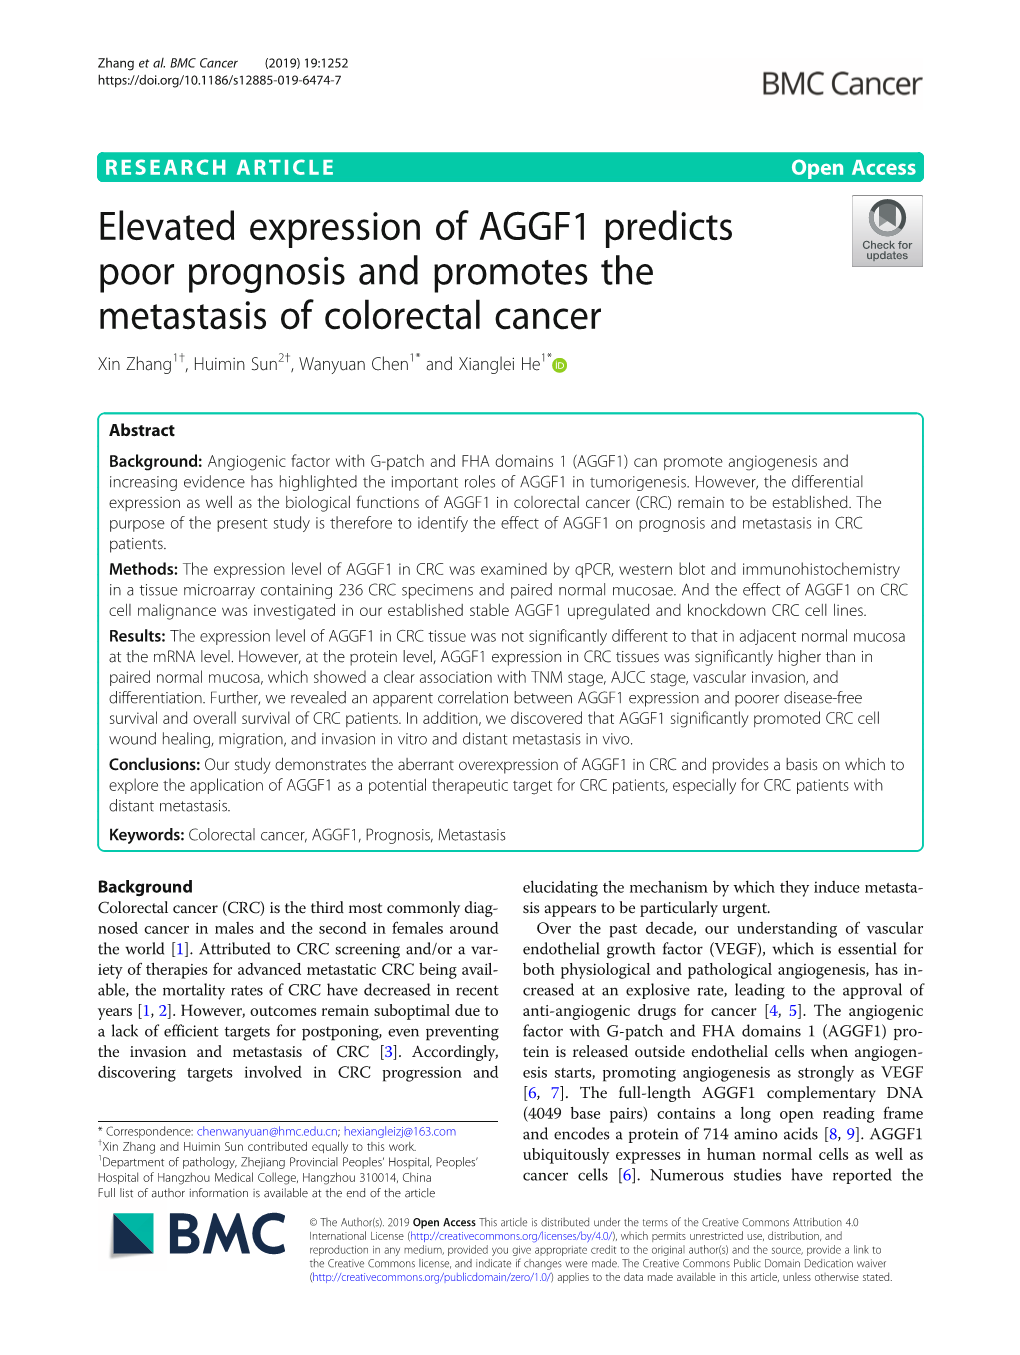 Elevated Expression of AGGF1 Predicts Poor Prognosis and Promotes the Metastasis of Colorectal Cancer Xin Zhang1†, Huimin Sun2†, Wanyuan Chen1* and Xianglei He1*